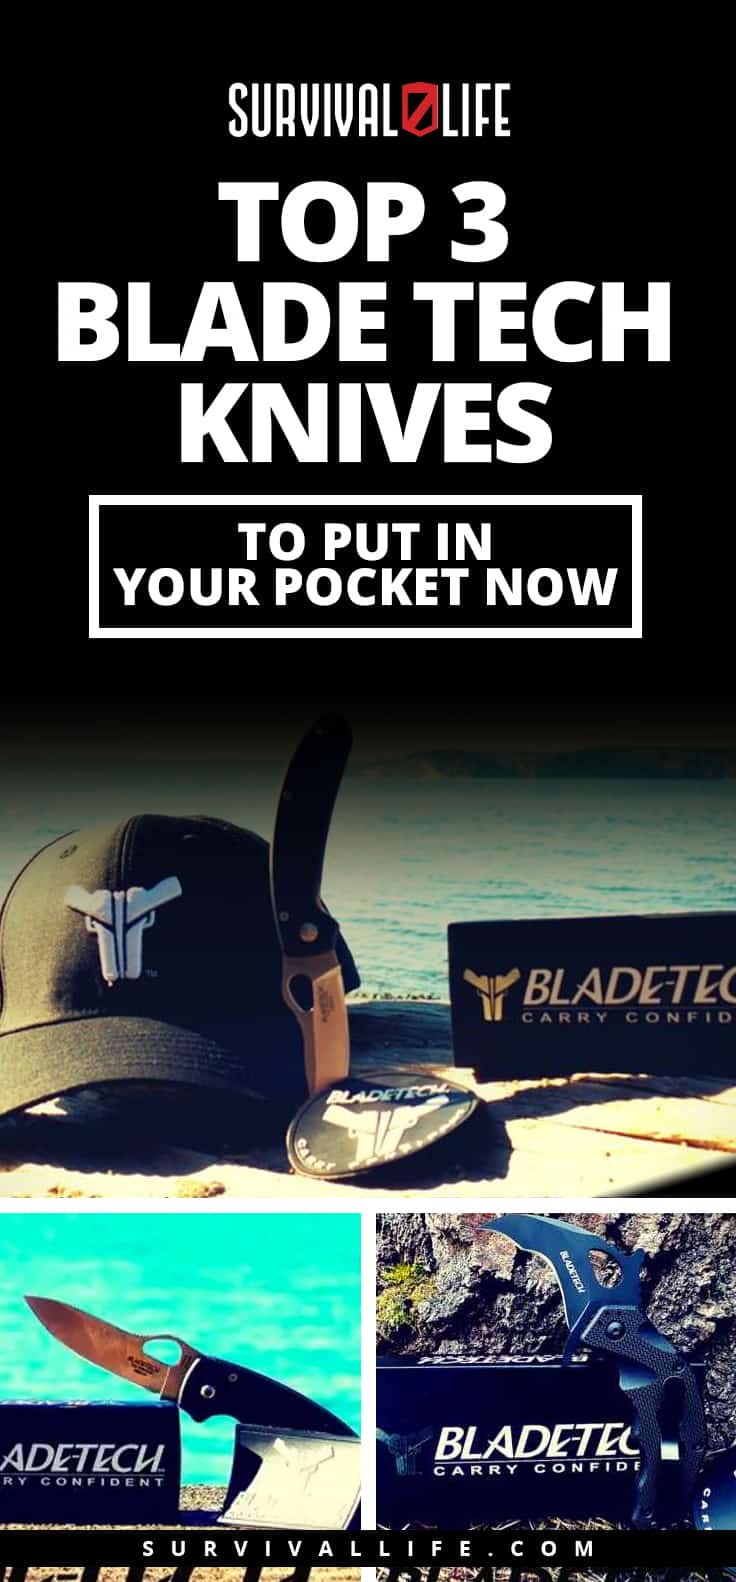 Top 3 Blade Tech Knives To Put In Your Pocket NOW